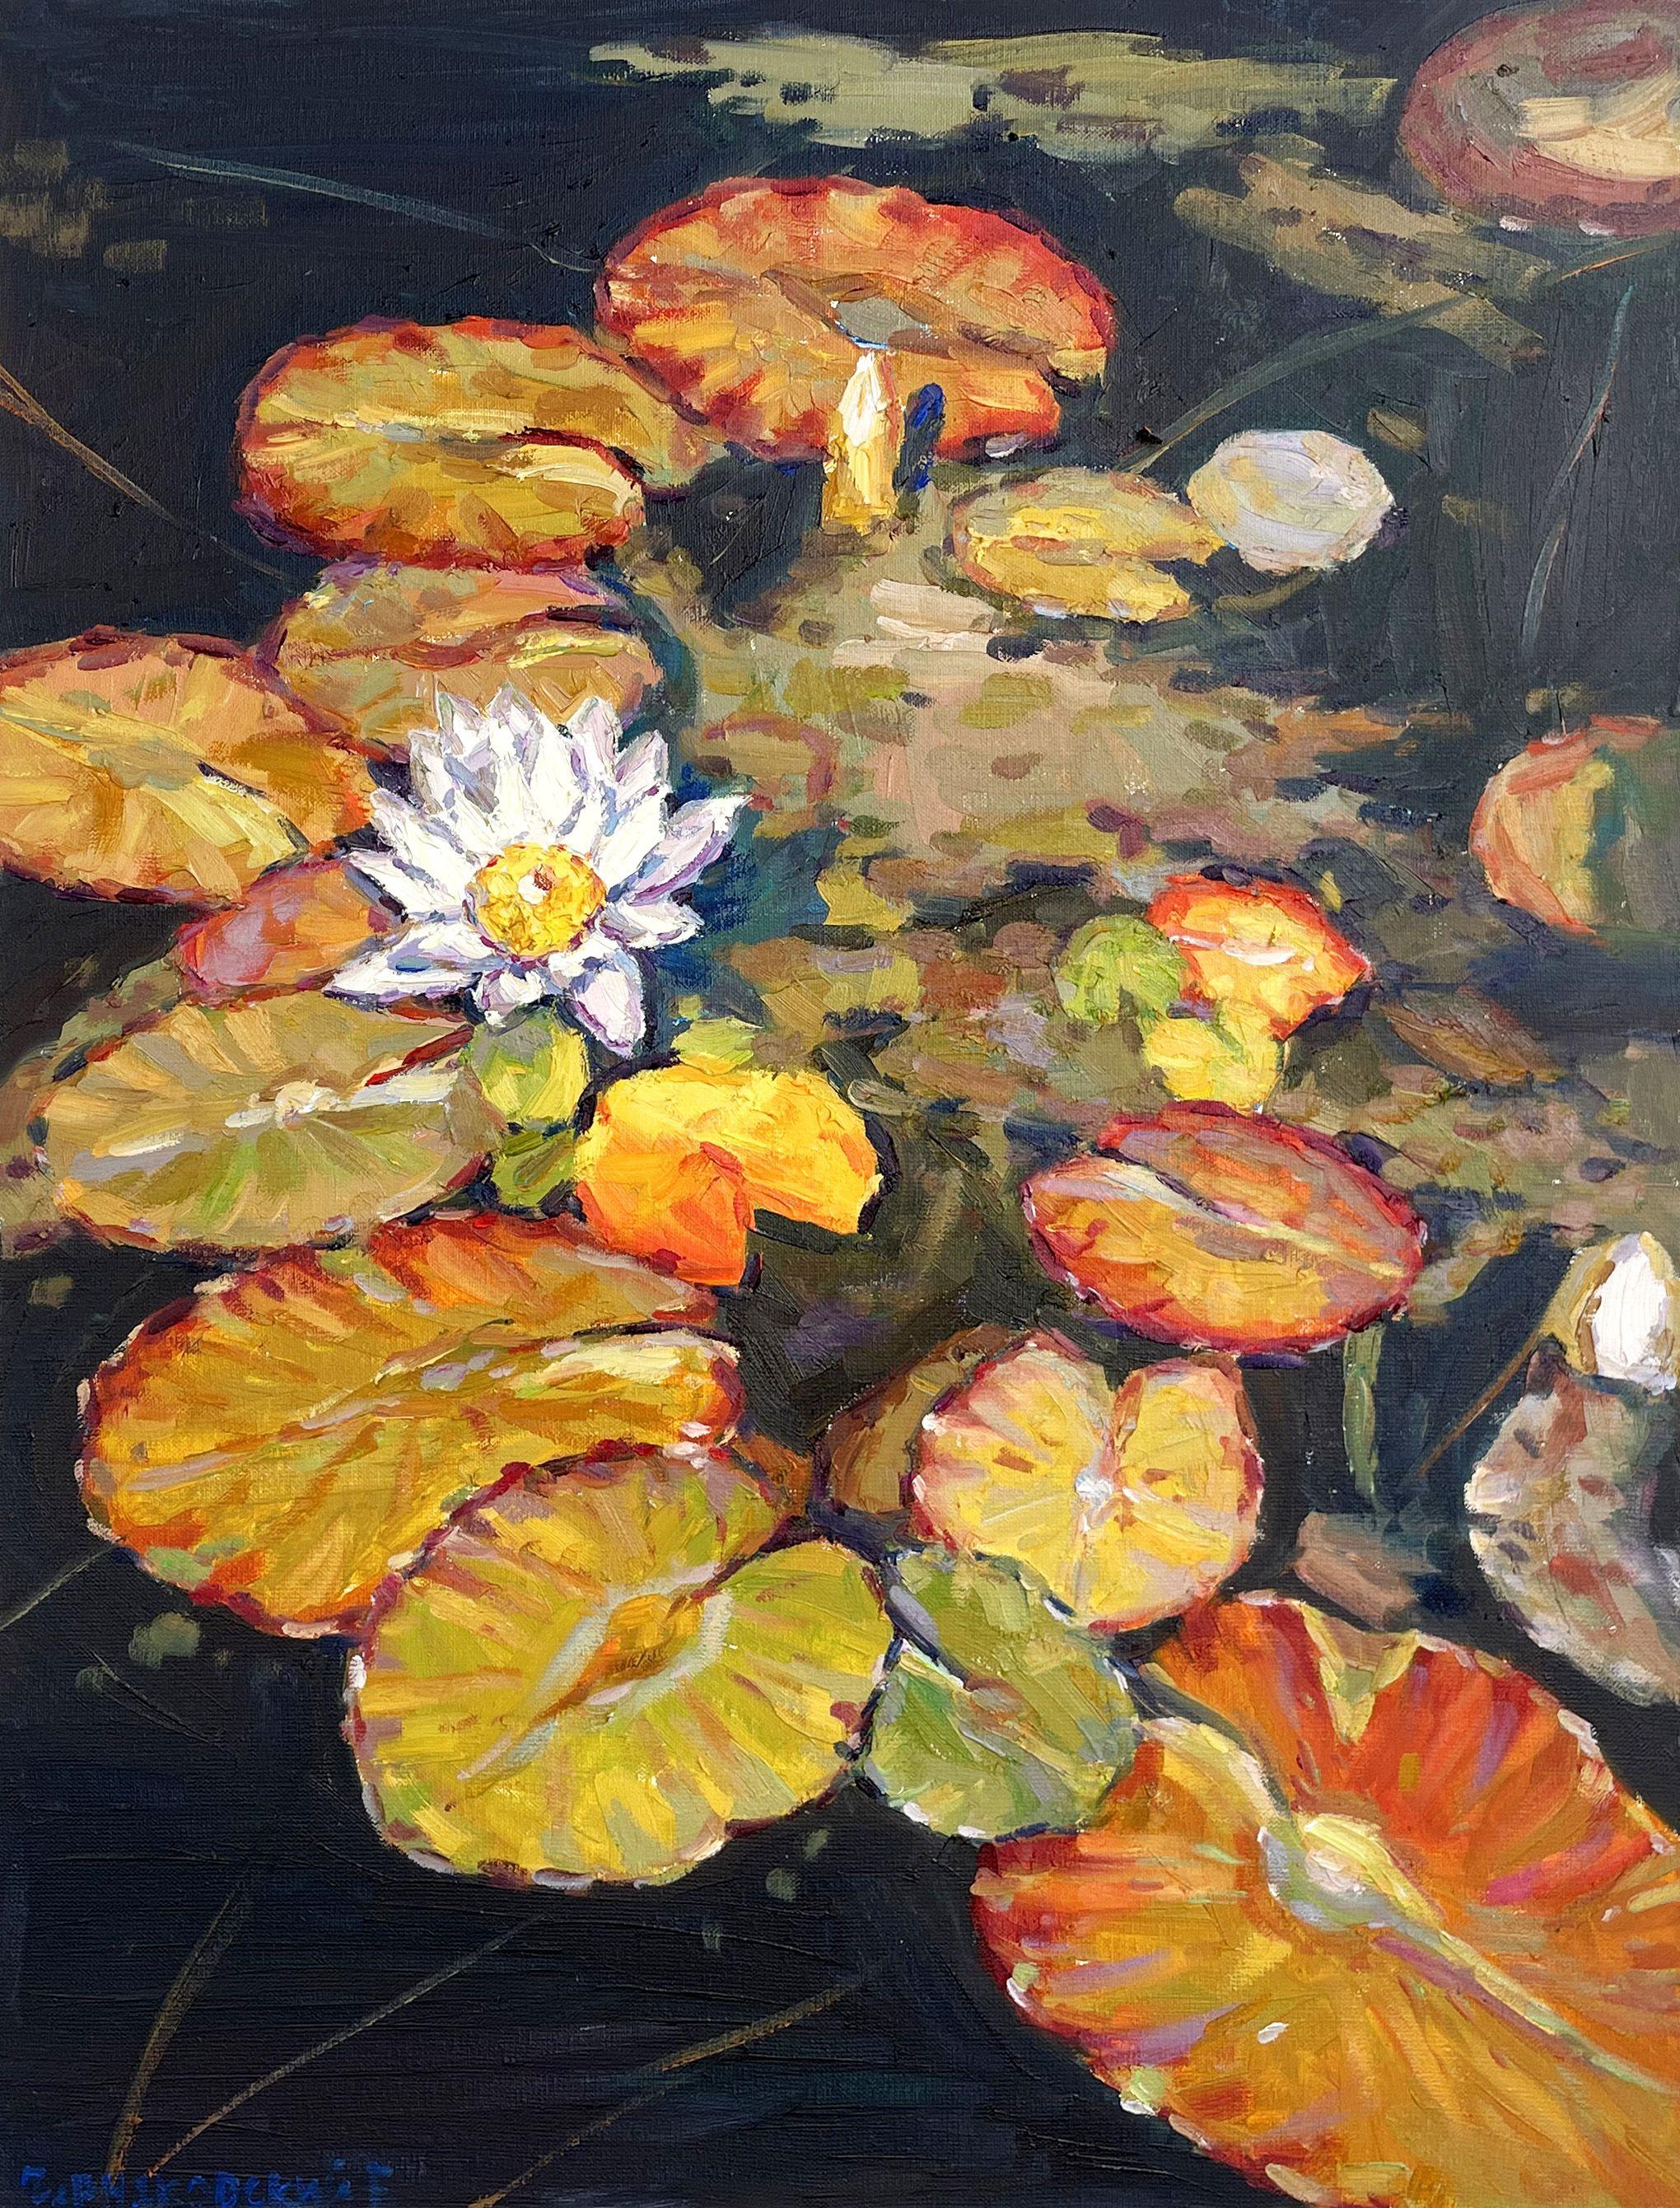 https://a.1stdibscdn.com/evgeny-chernyakovsky-paintings-water-lily-painting-oil-on-canvas-for-sale/a_8021/a_128354321691312068674/49804_og54mchesbb99gg9c9m0gvm7ldq0m5lc_Rc90WxFdhH4j7pVt_1_1__master.jpg